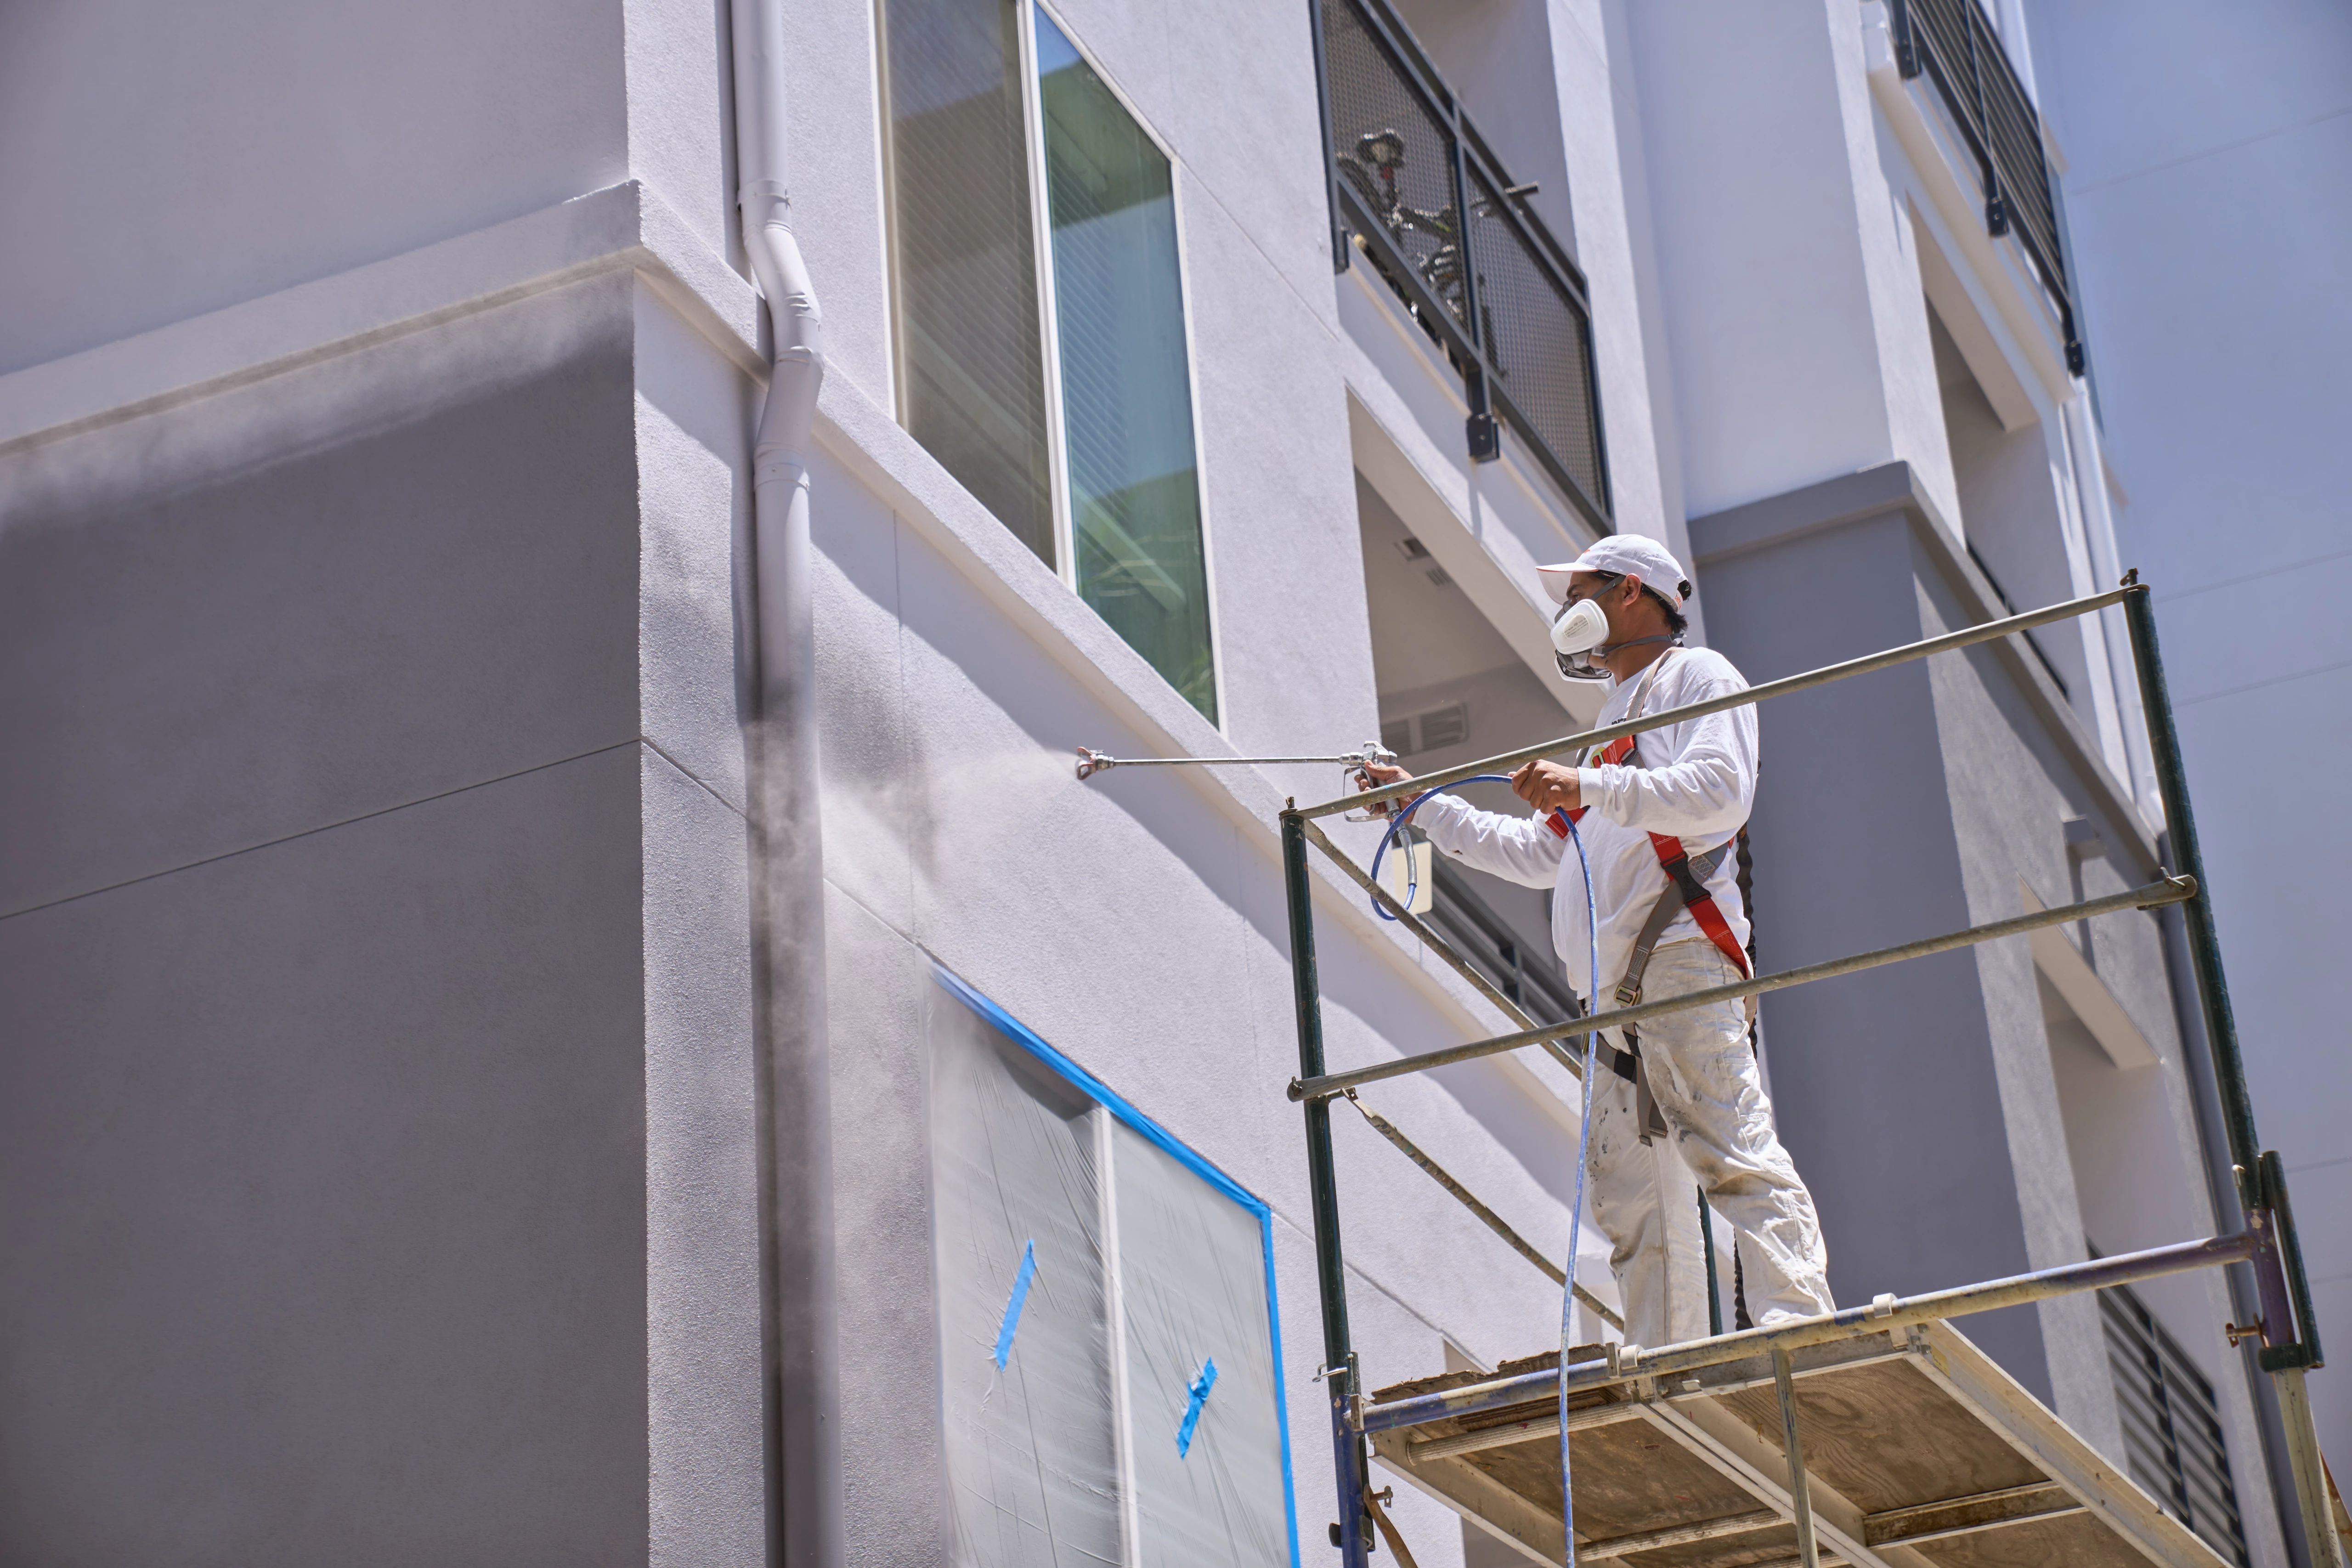 Professional Painter Spraying a Commercial Building